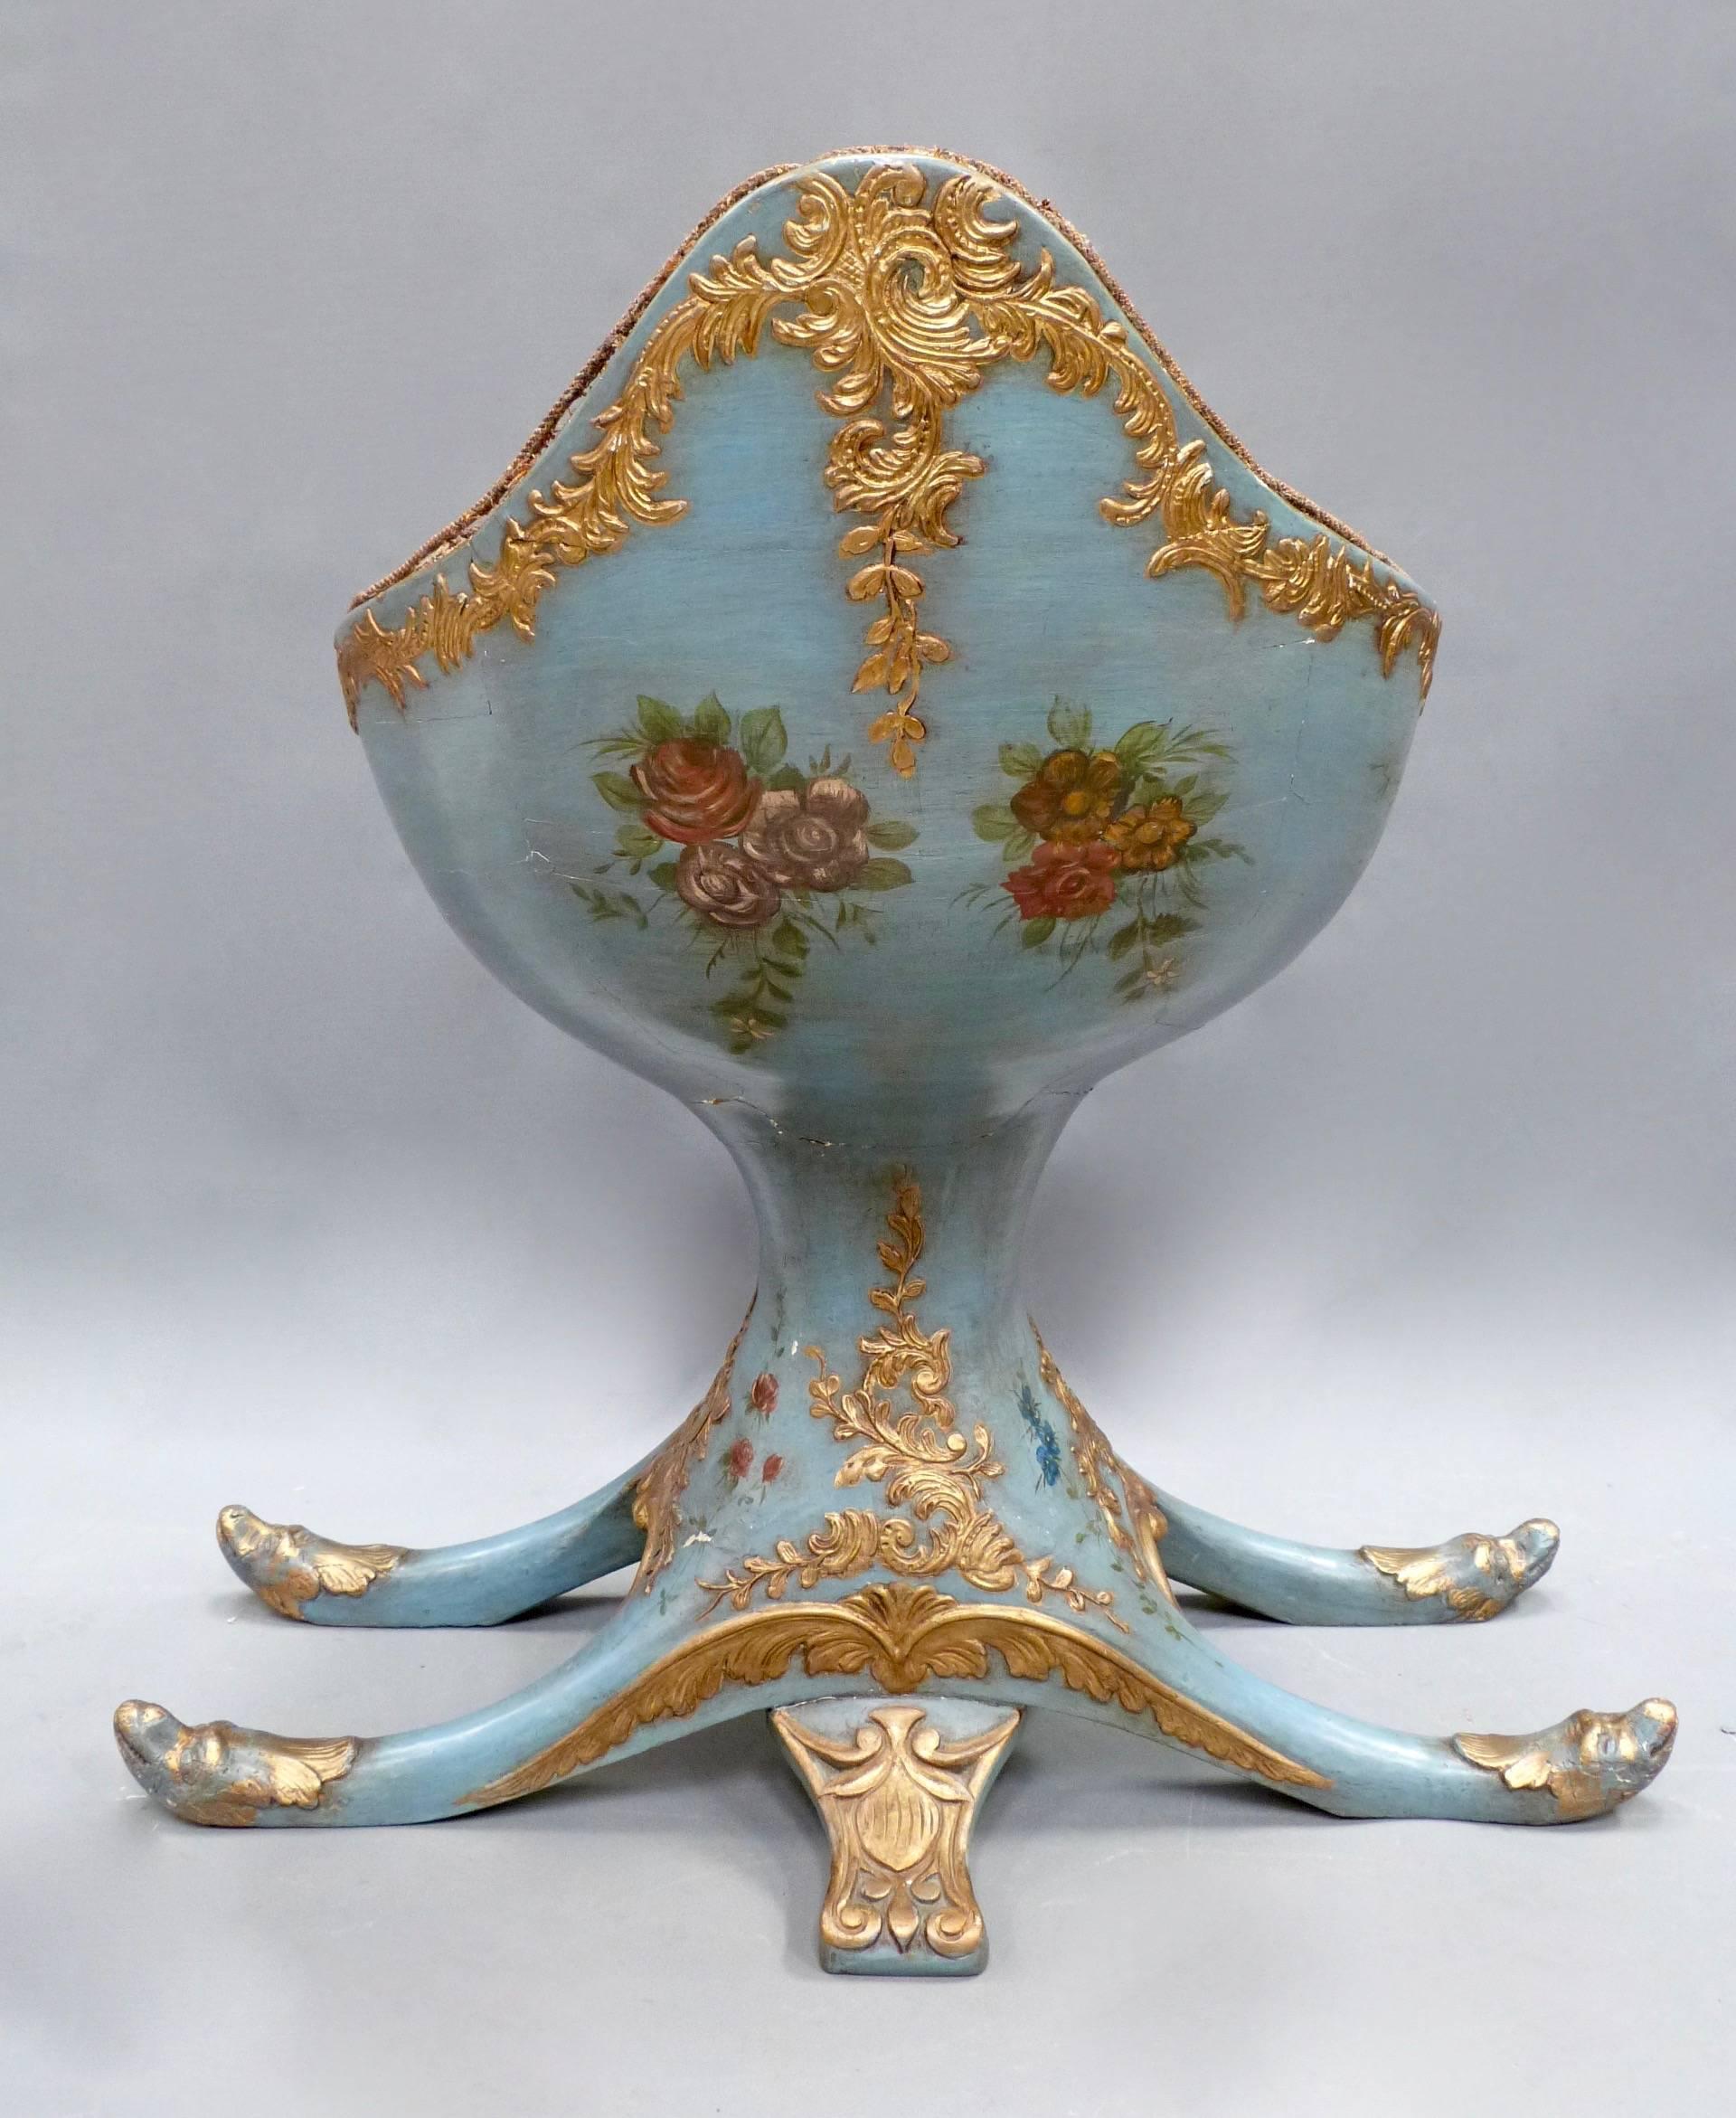 An early 20th century Italian painted and gilt Gondola chair. The chair features all-over paint work in Blue with painted floral decoration and a painted panel of the The St Mark Lion.